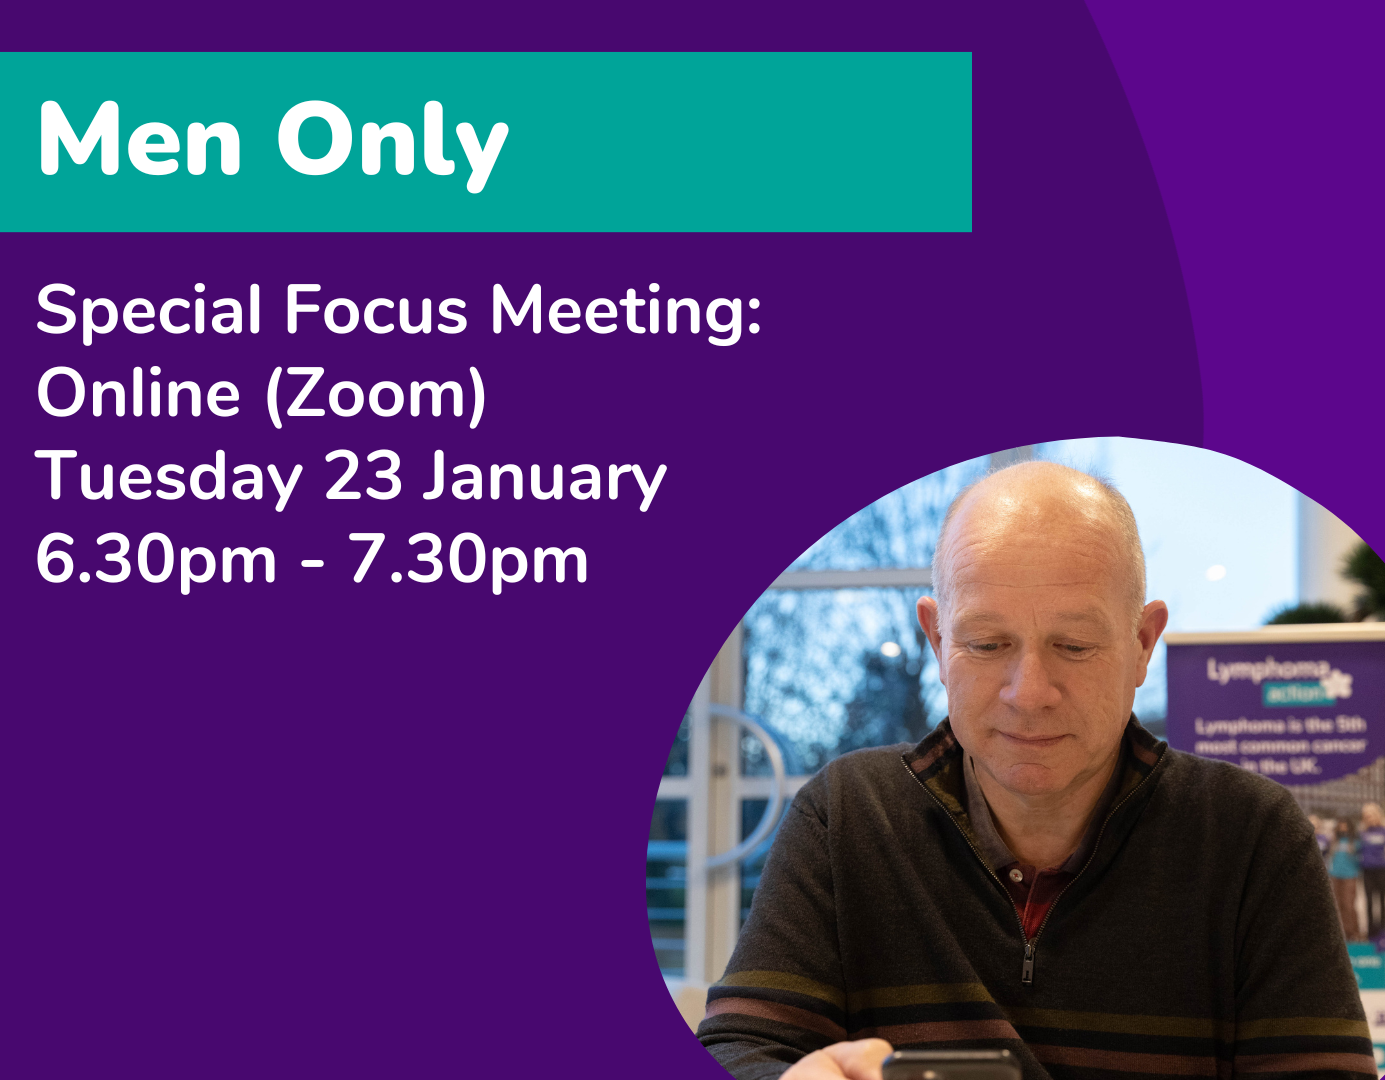 Men only special focus meeting online Zoom Tuesday 23 January 6.30pm - 7.30pm